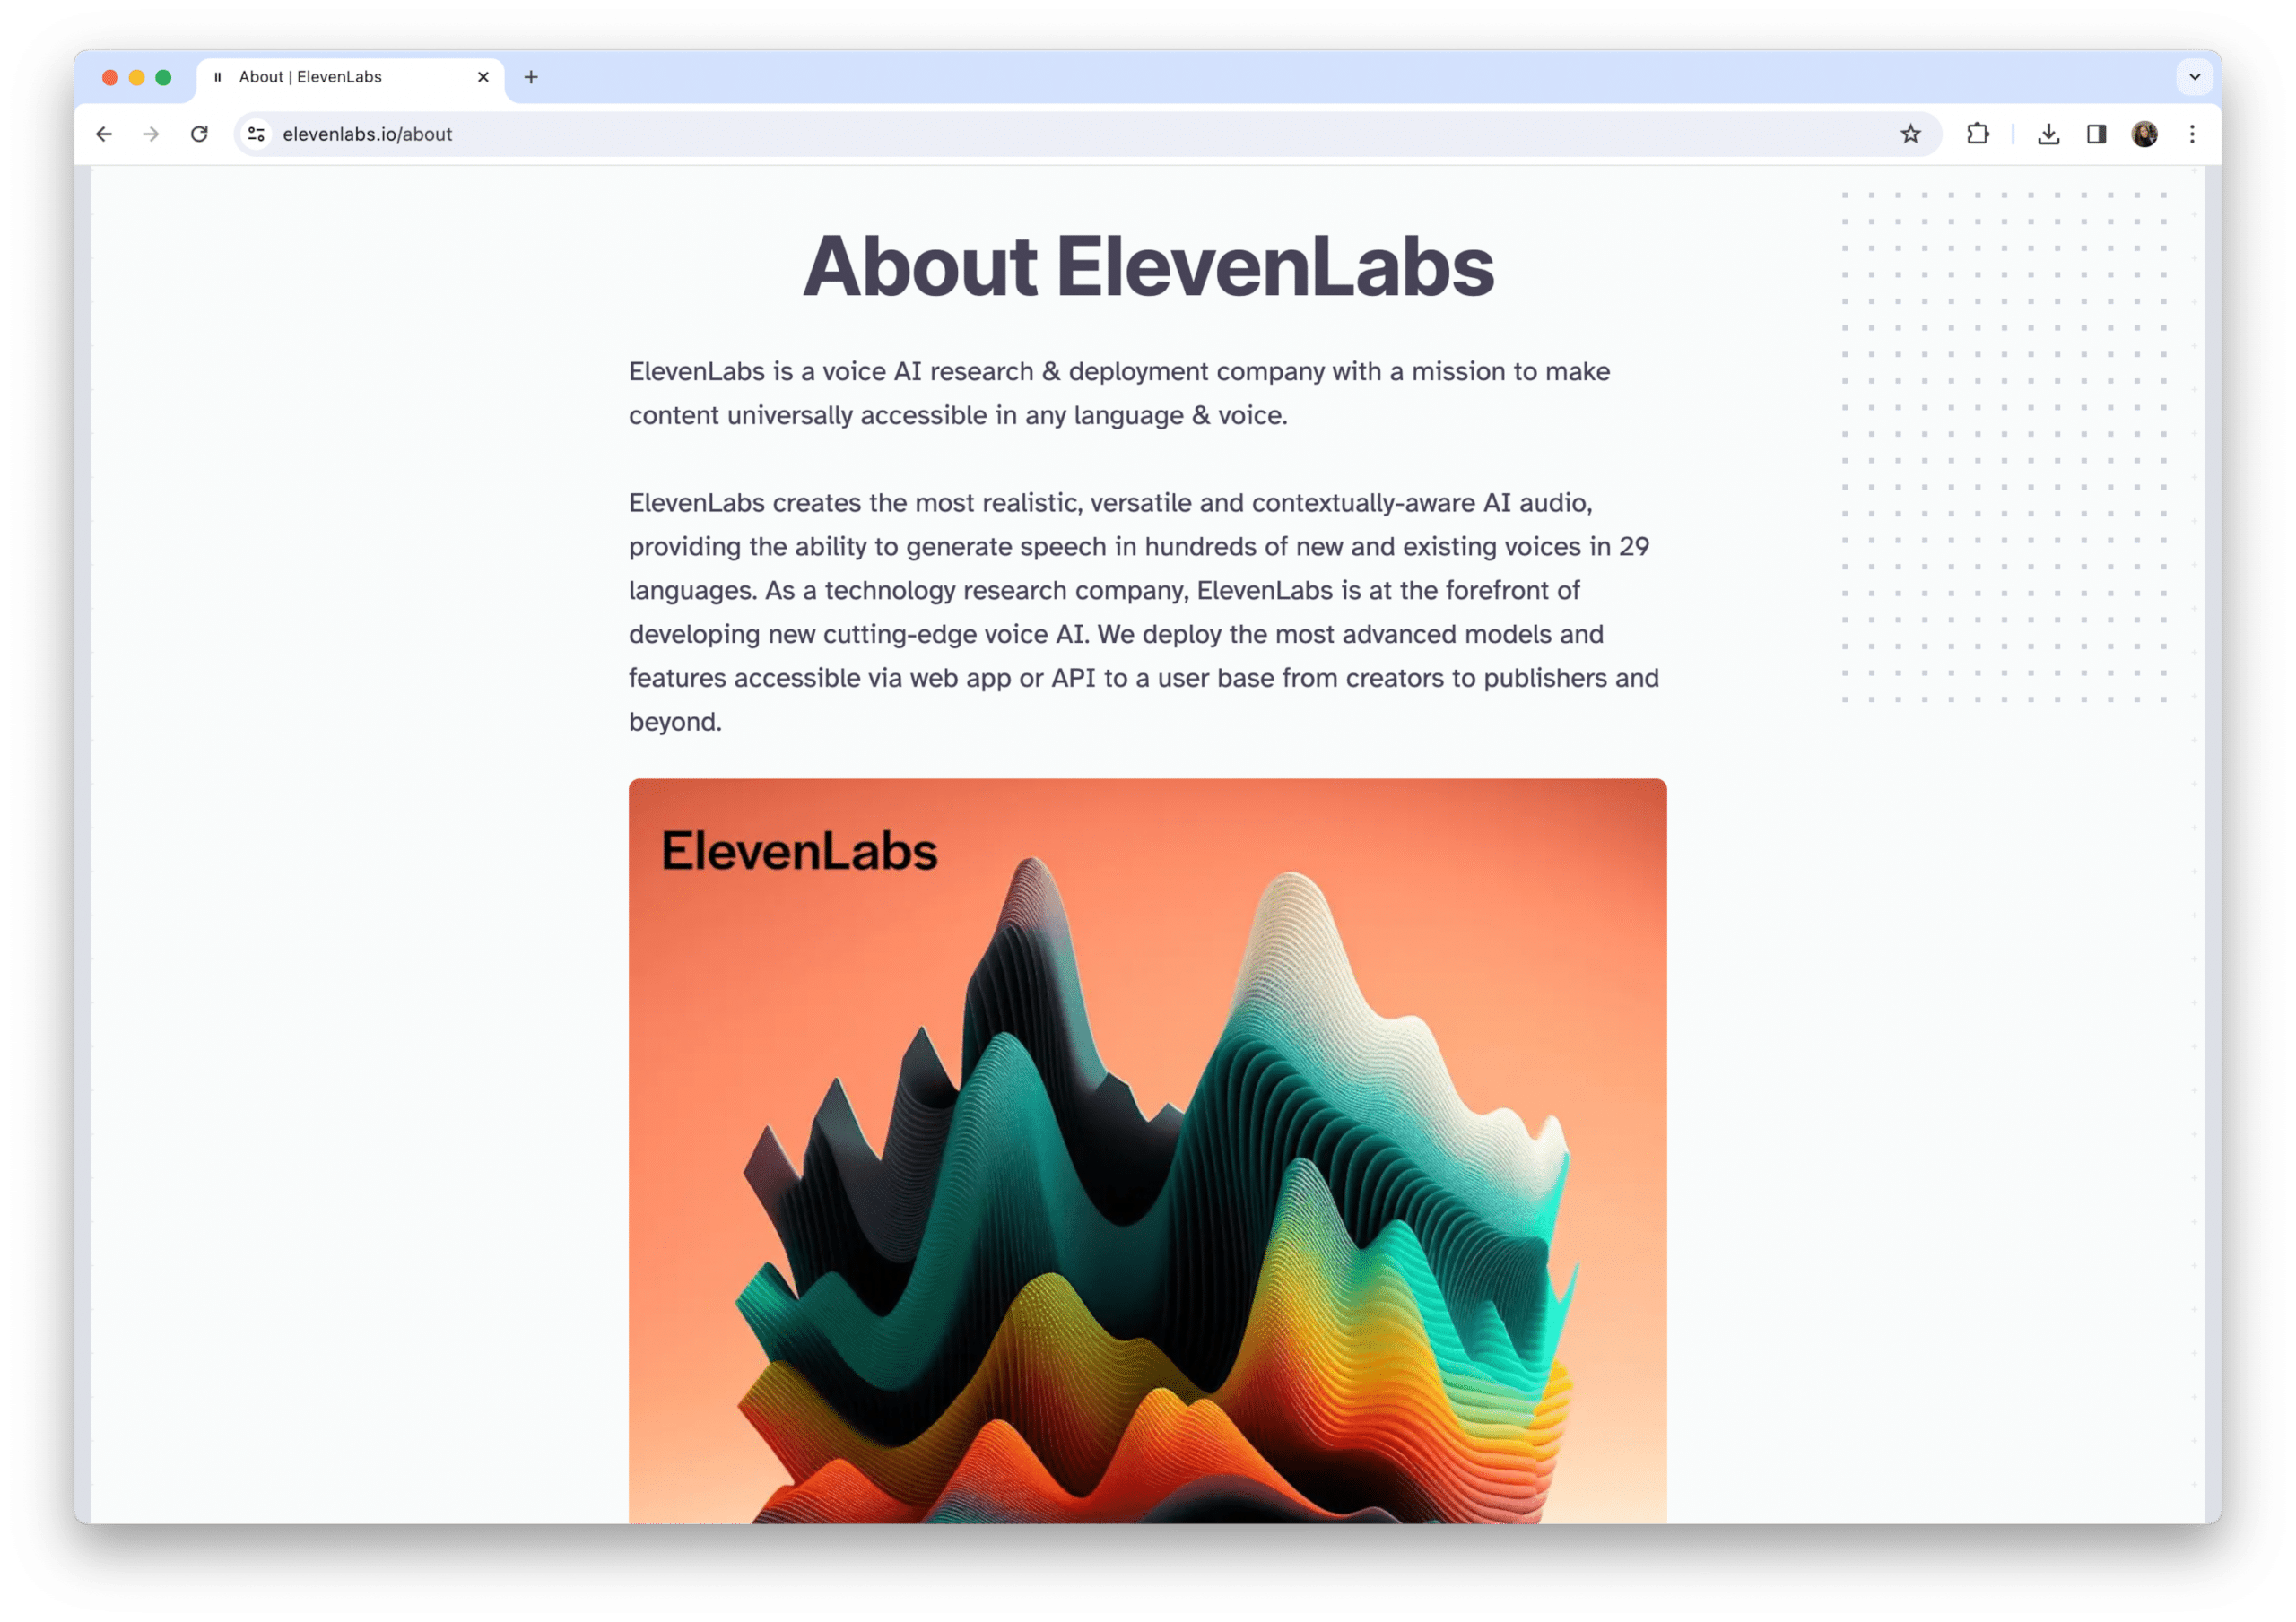 Eleven Labs, about Eleven Labs